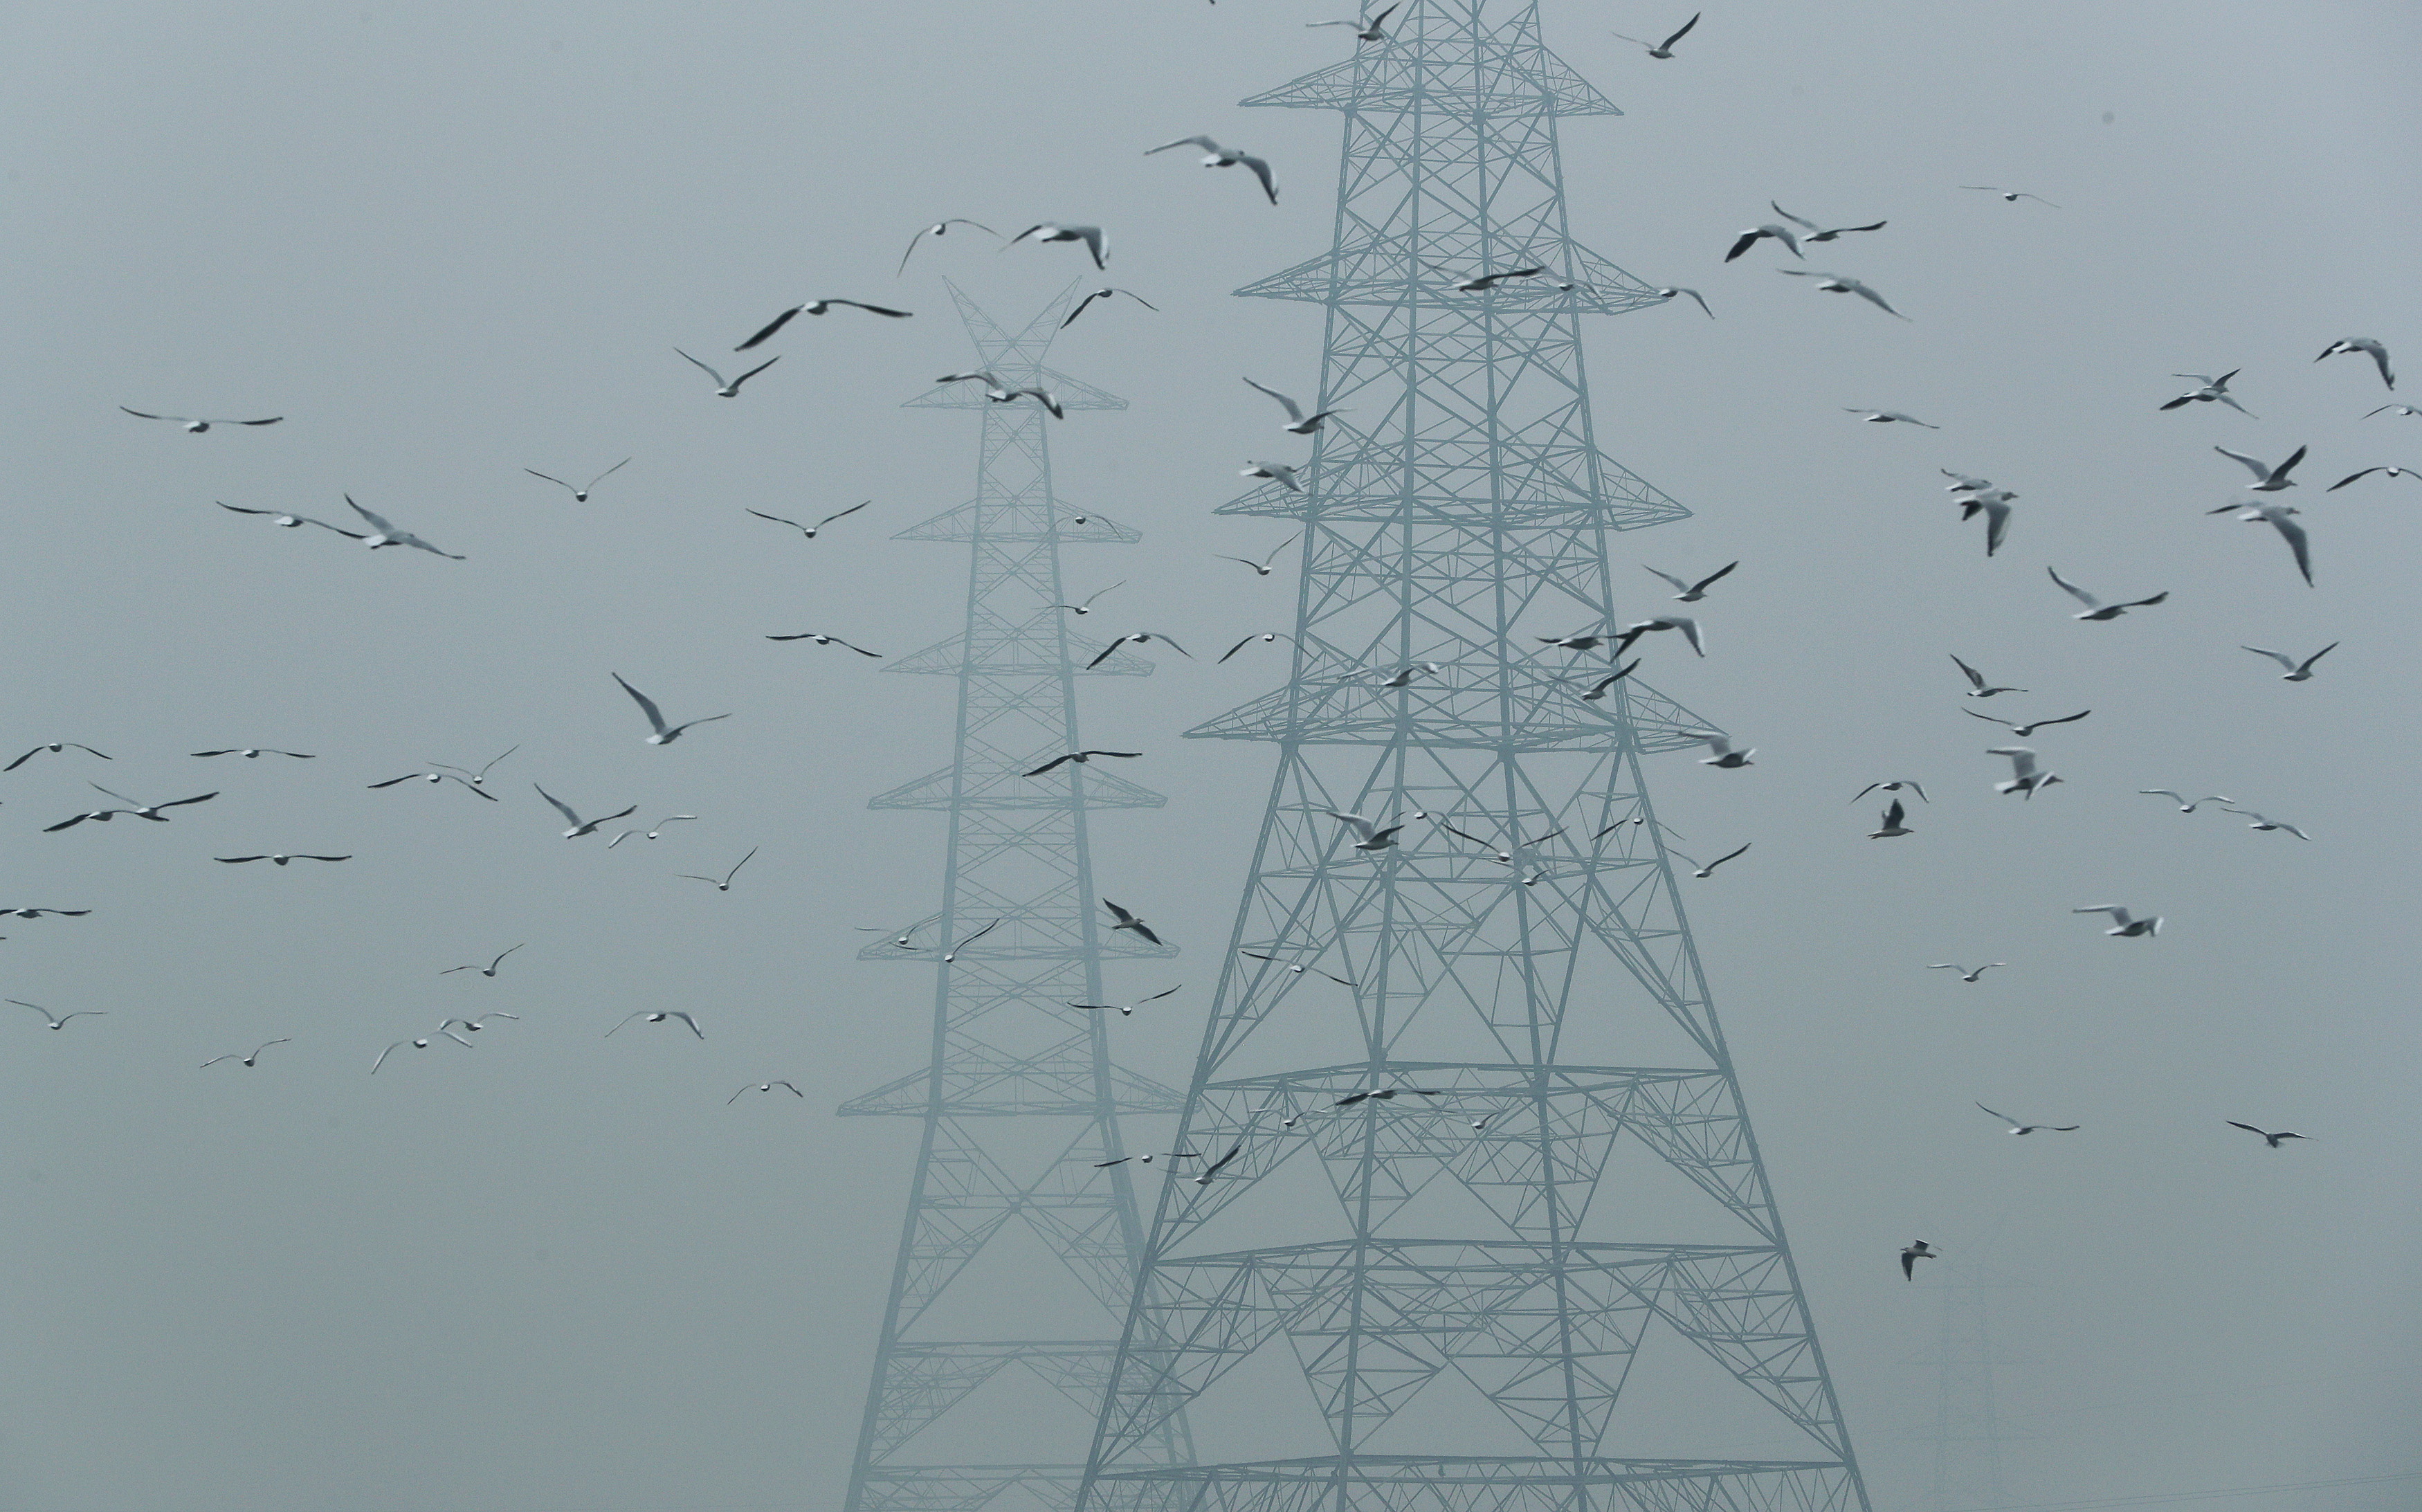 Birds fly next to electricity pylons on a smoggy afternoon in the old quarters of Delhi